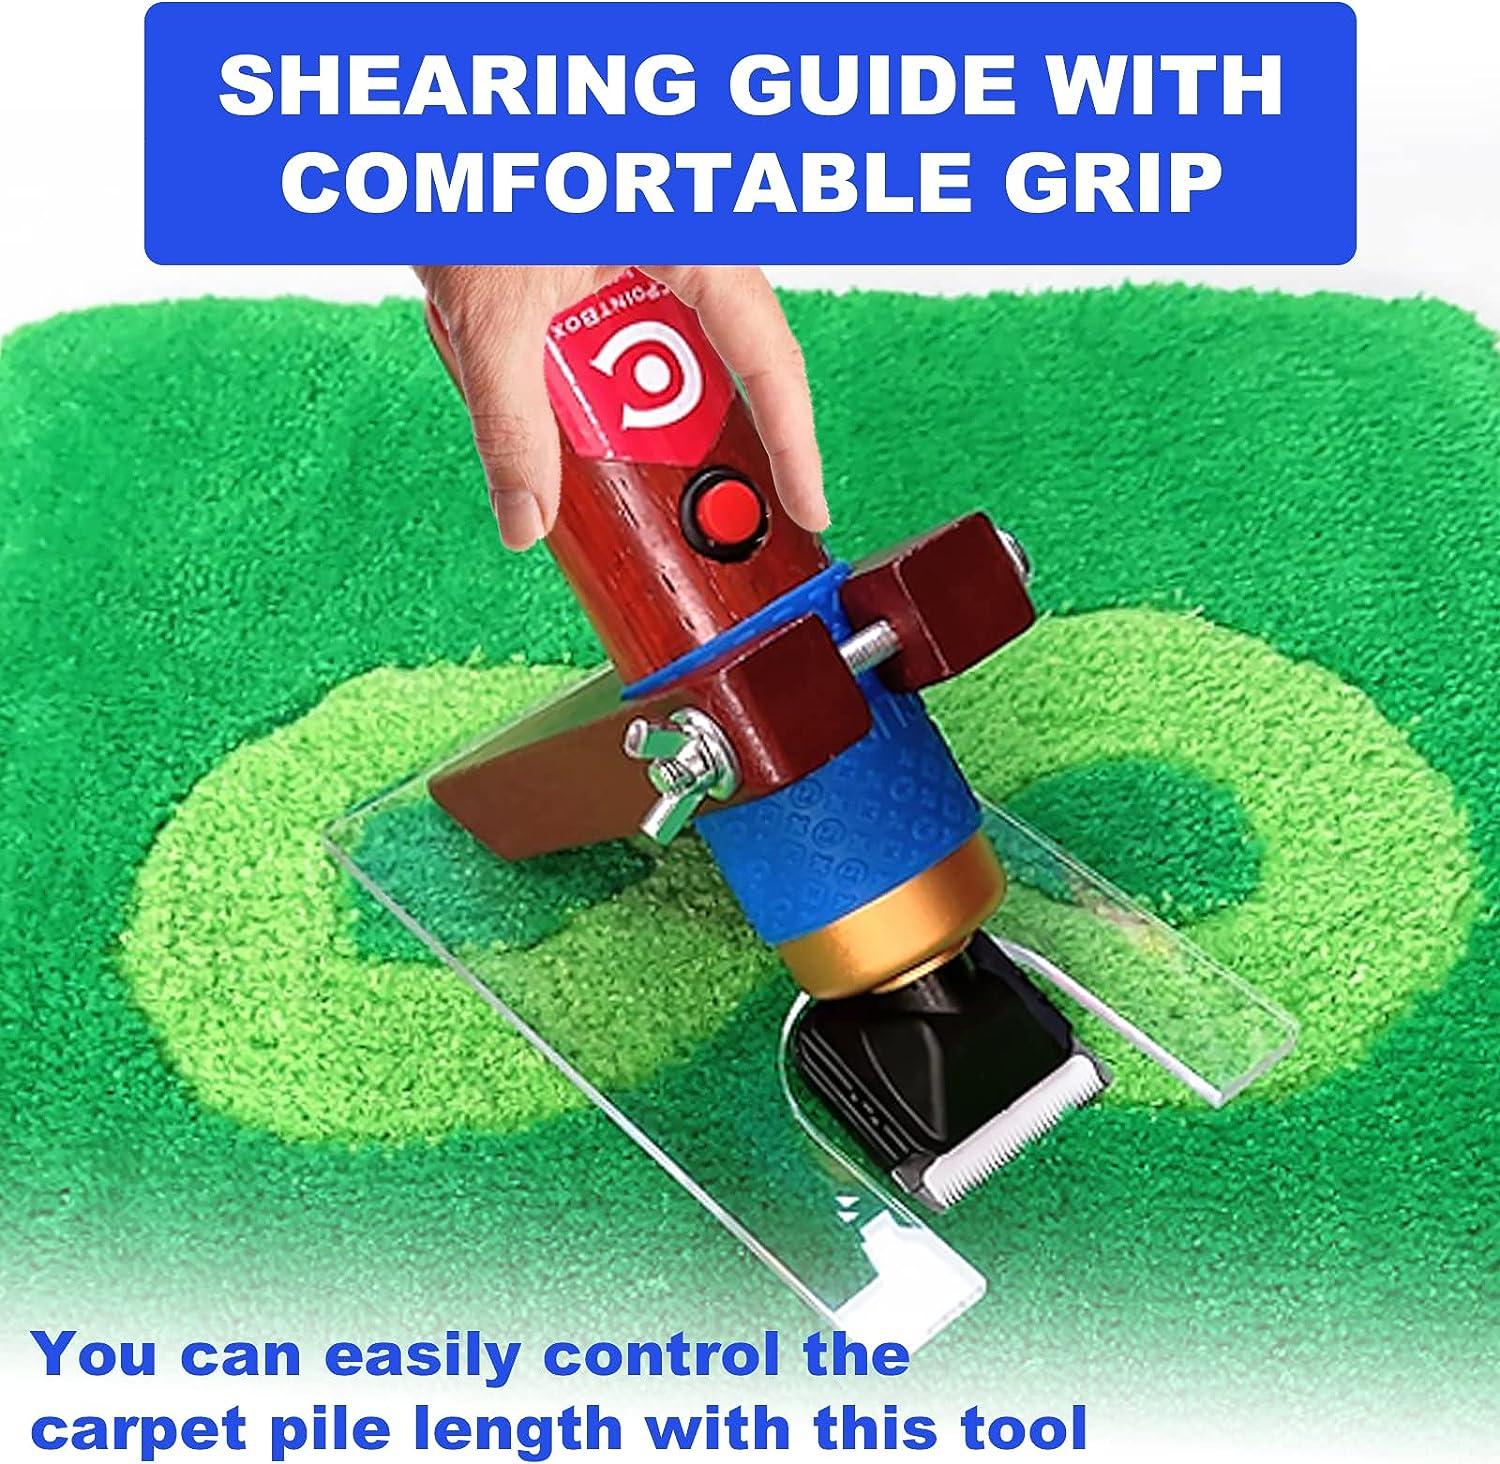 Riiai Carpet Trimmer with Shearing Guide, Carpet Shears Comes with 2  Blades, Low Noise Vibration Rug Trimmer, Carpet Carving Clippers for  Sculpting